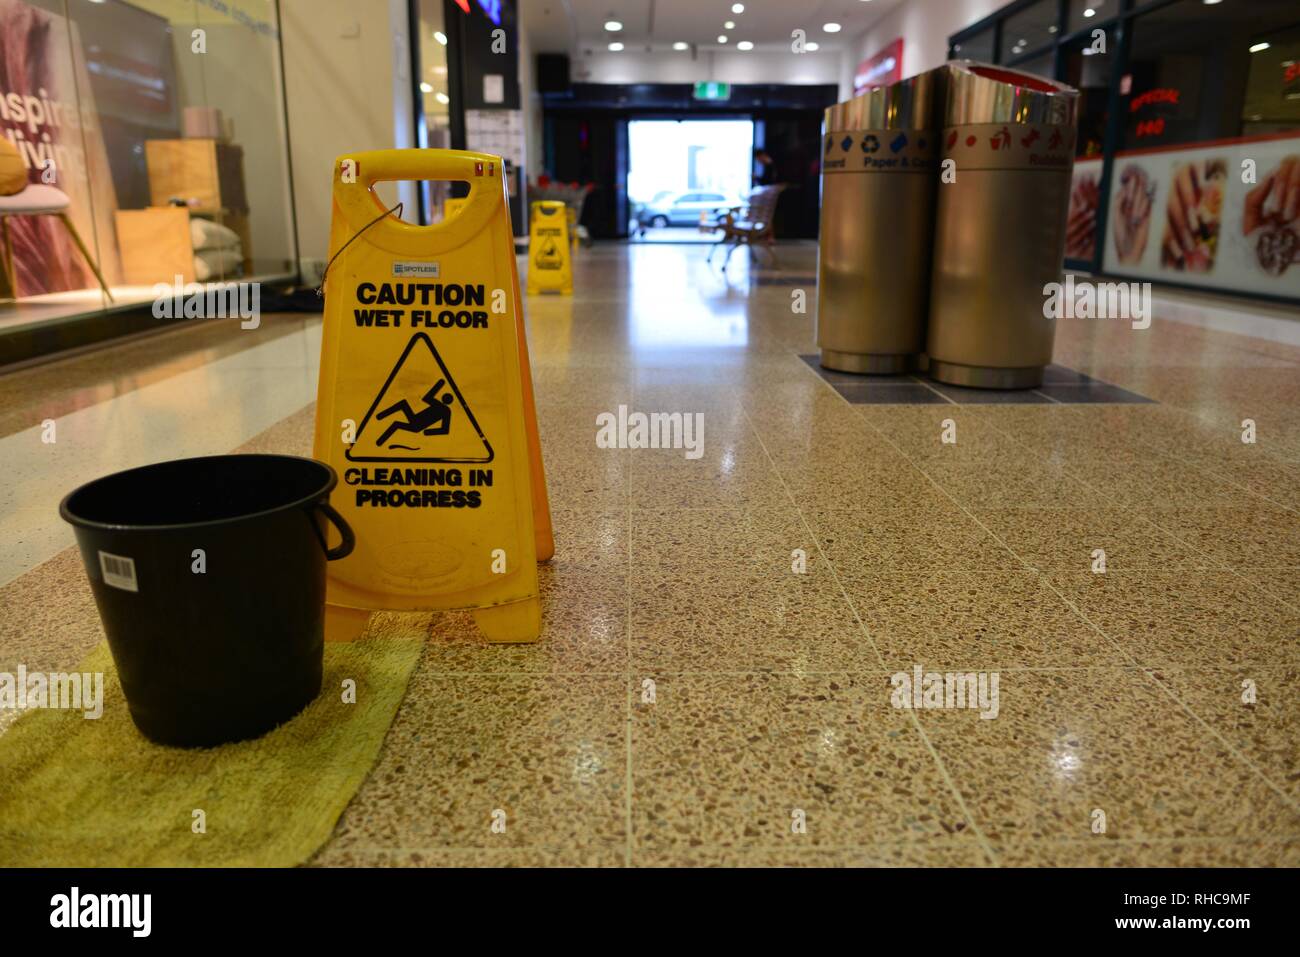 Caution Wet Floor Sign And A Bucket Inside Stockland Shopping